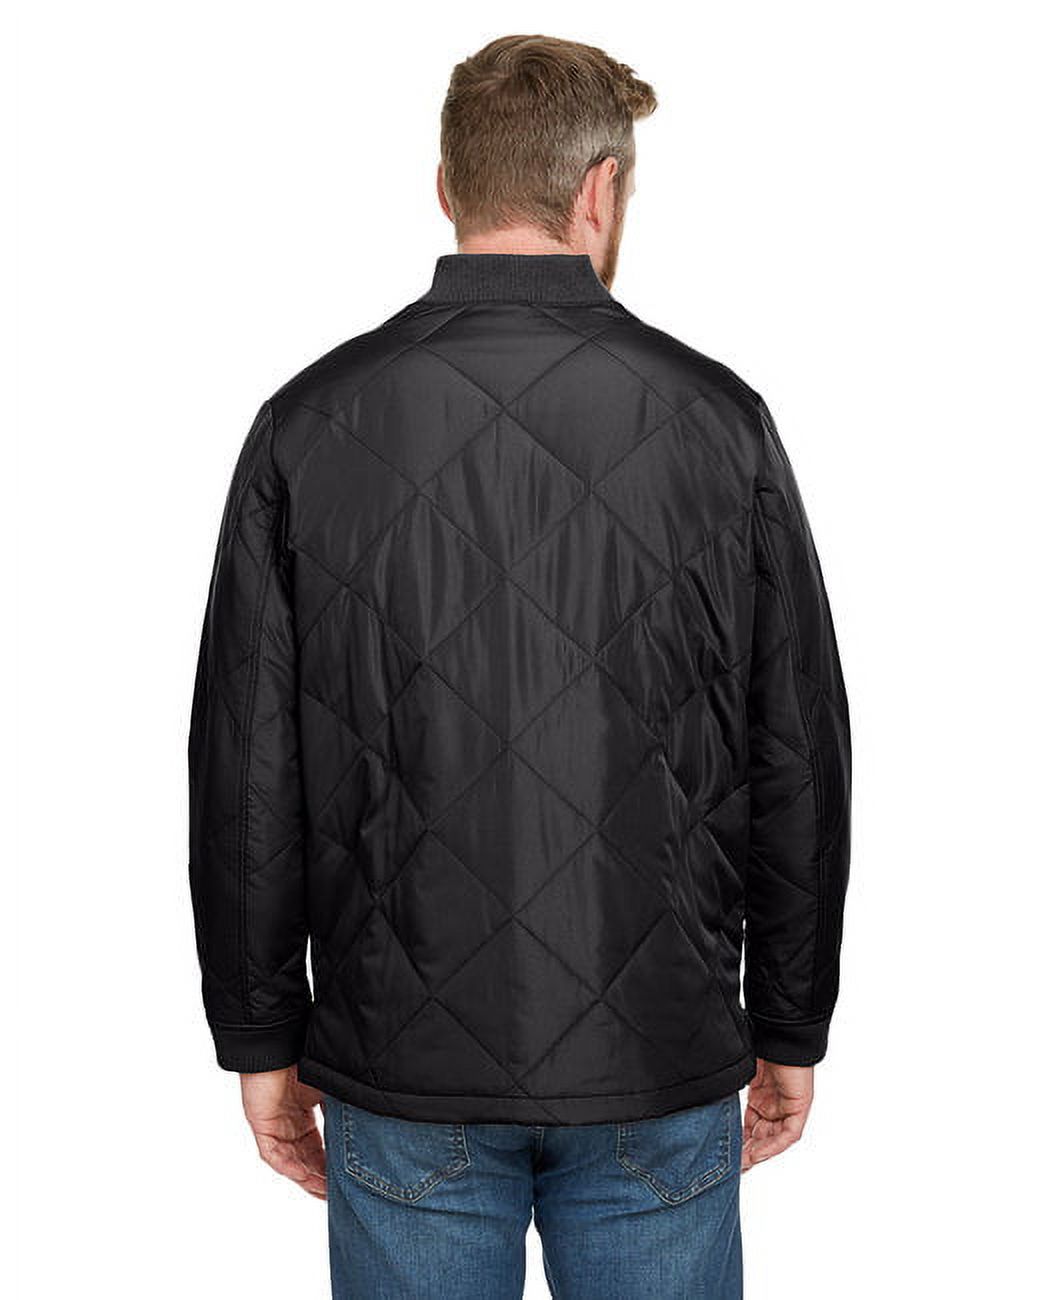 Adult Dockside Insulated Utility Jacket - DARK CHARCOAL - XL - image 2 of 3